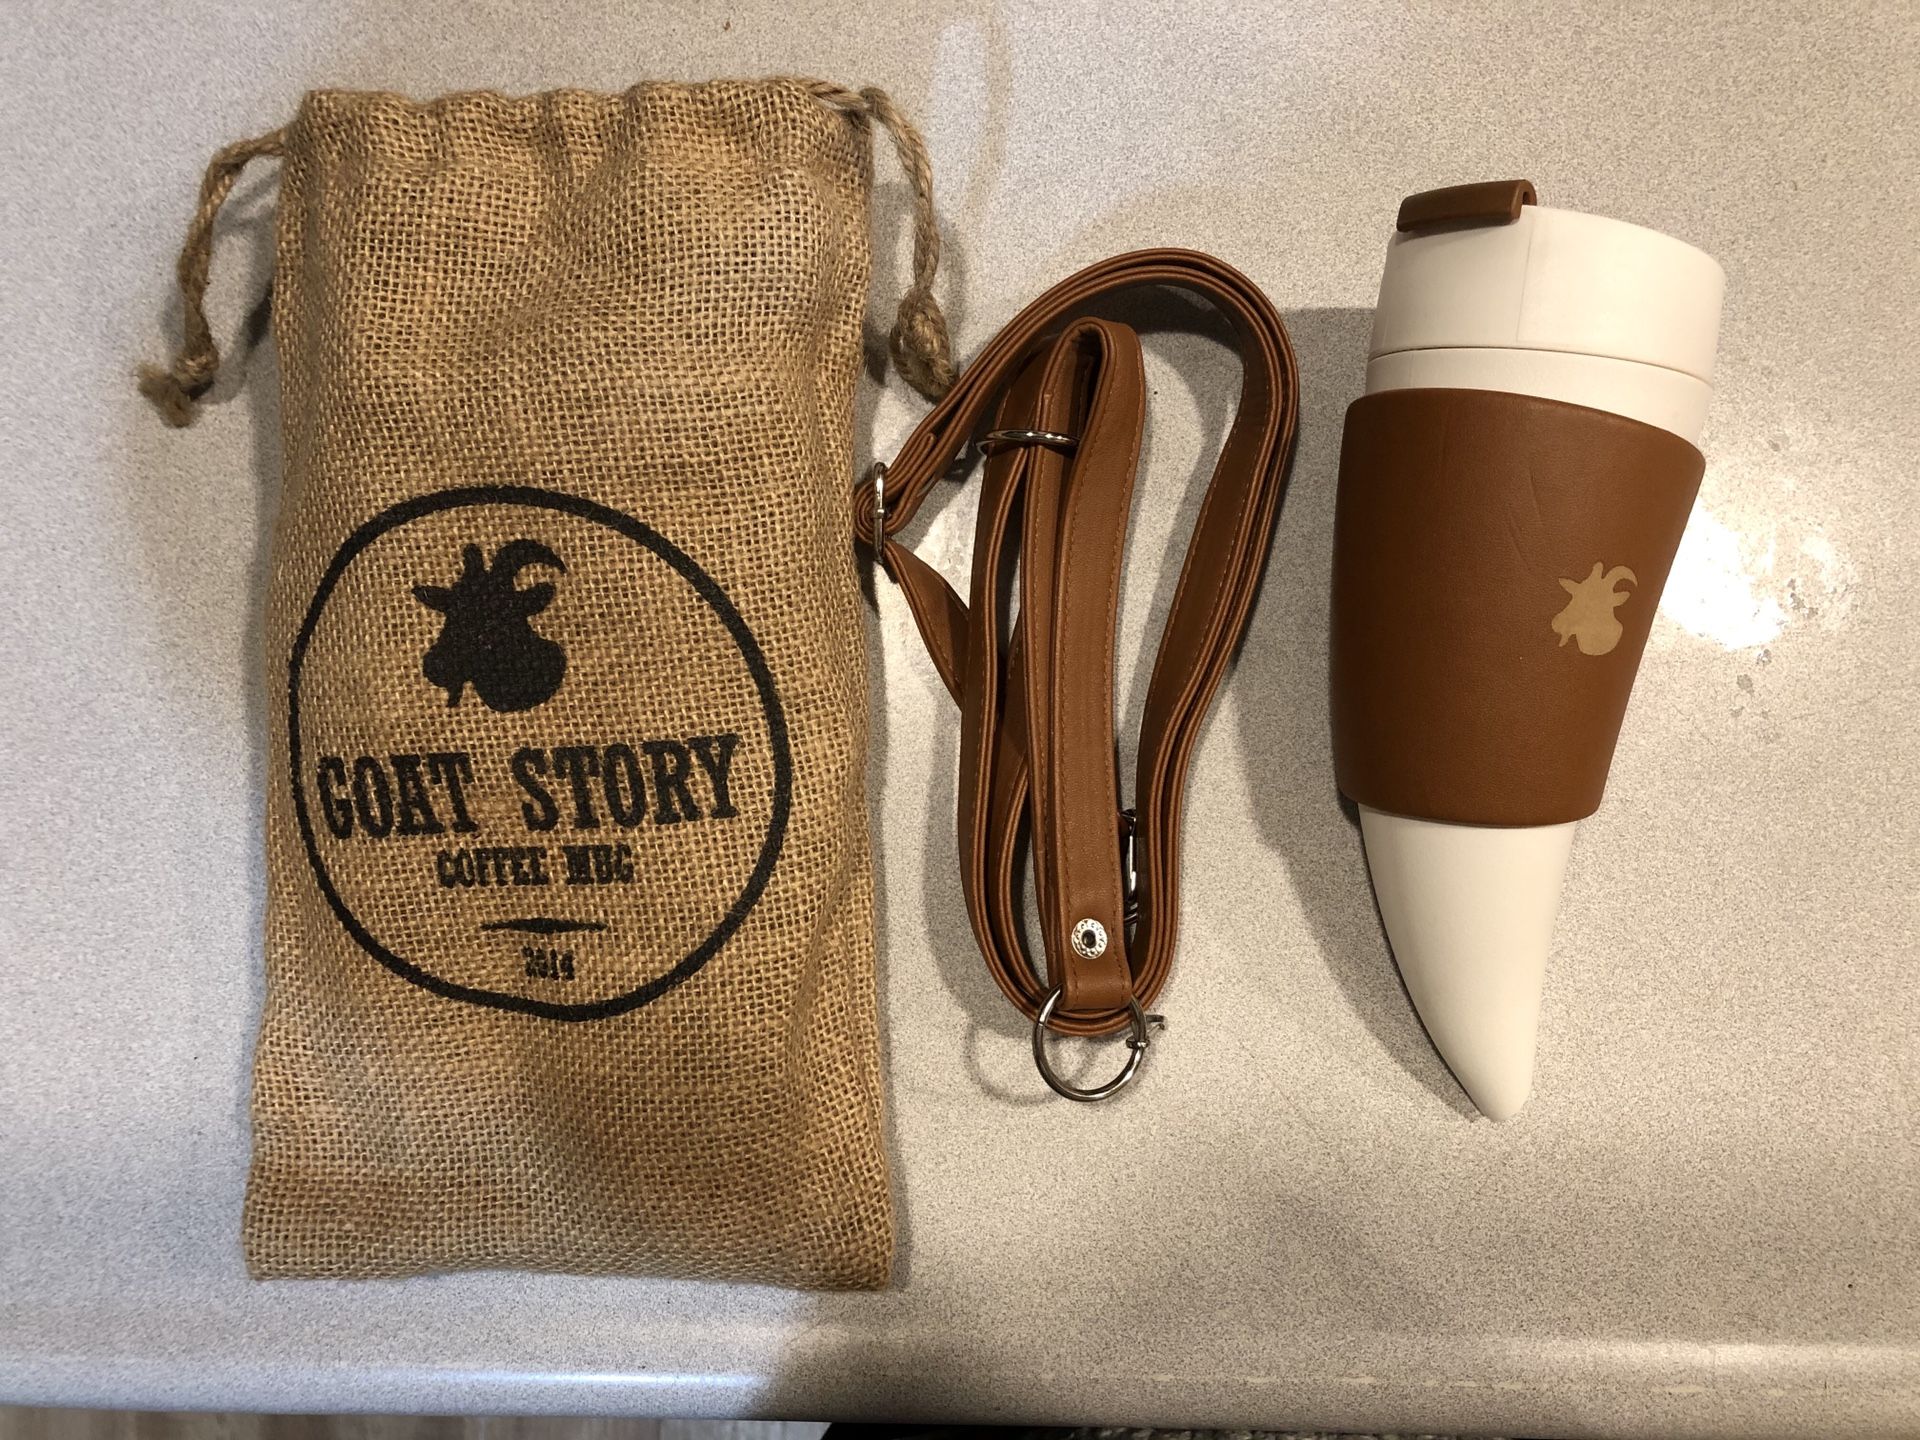 Goat story coffee cup. Stylish!